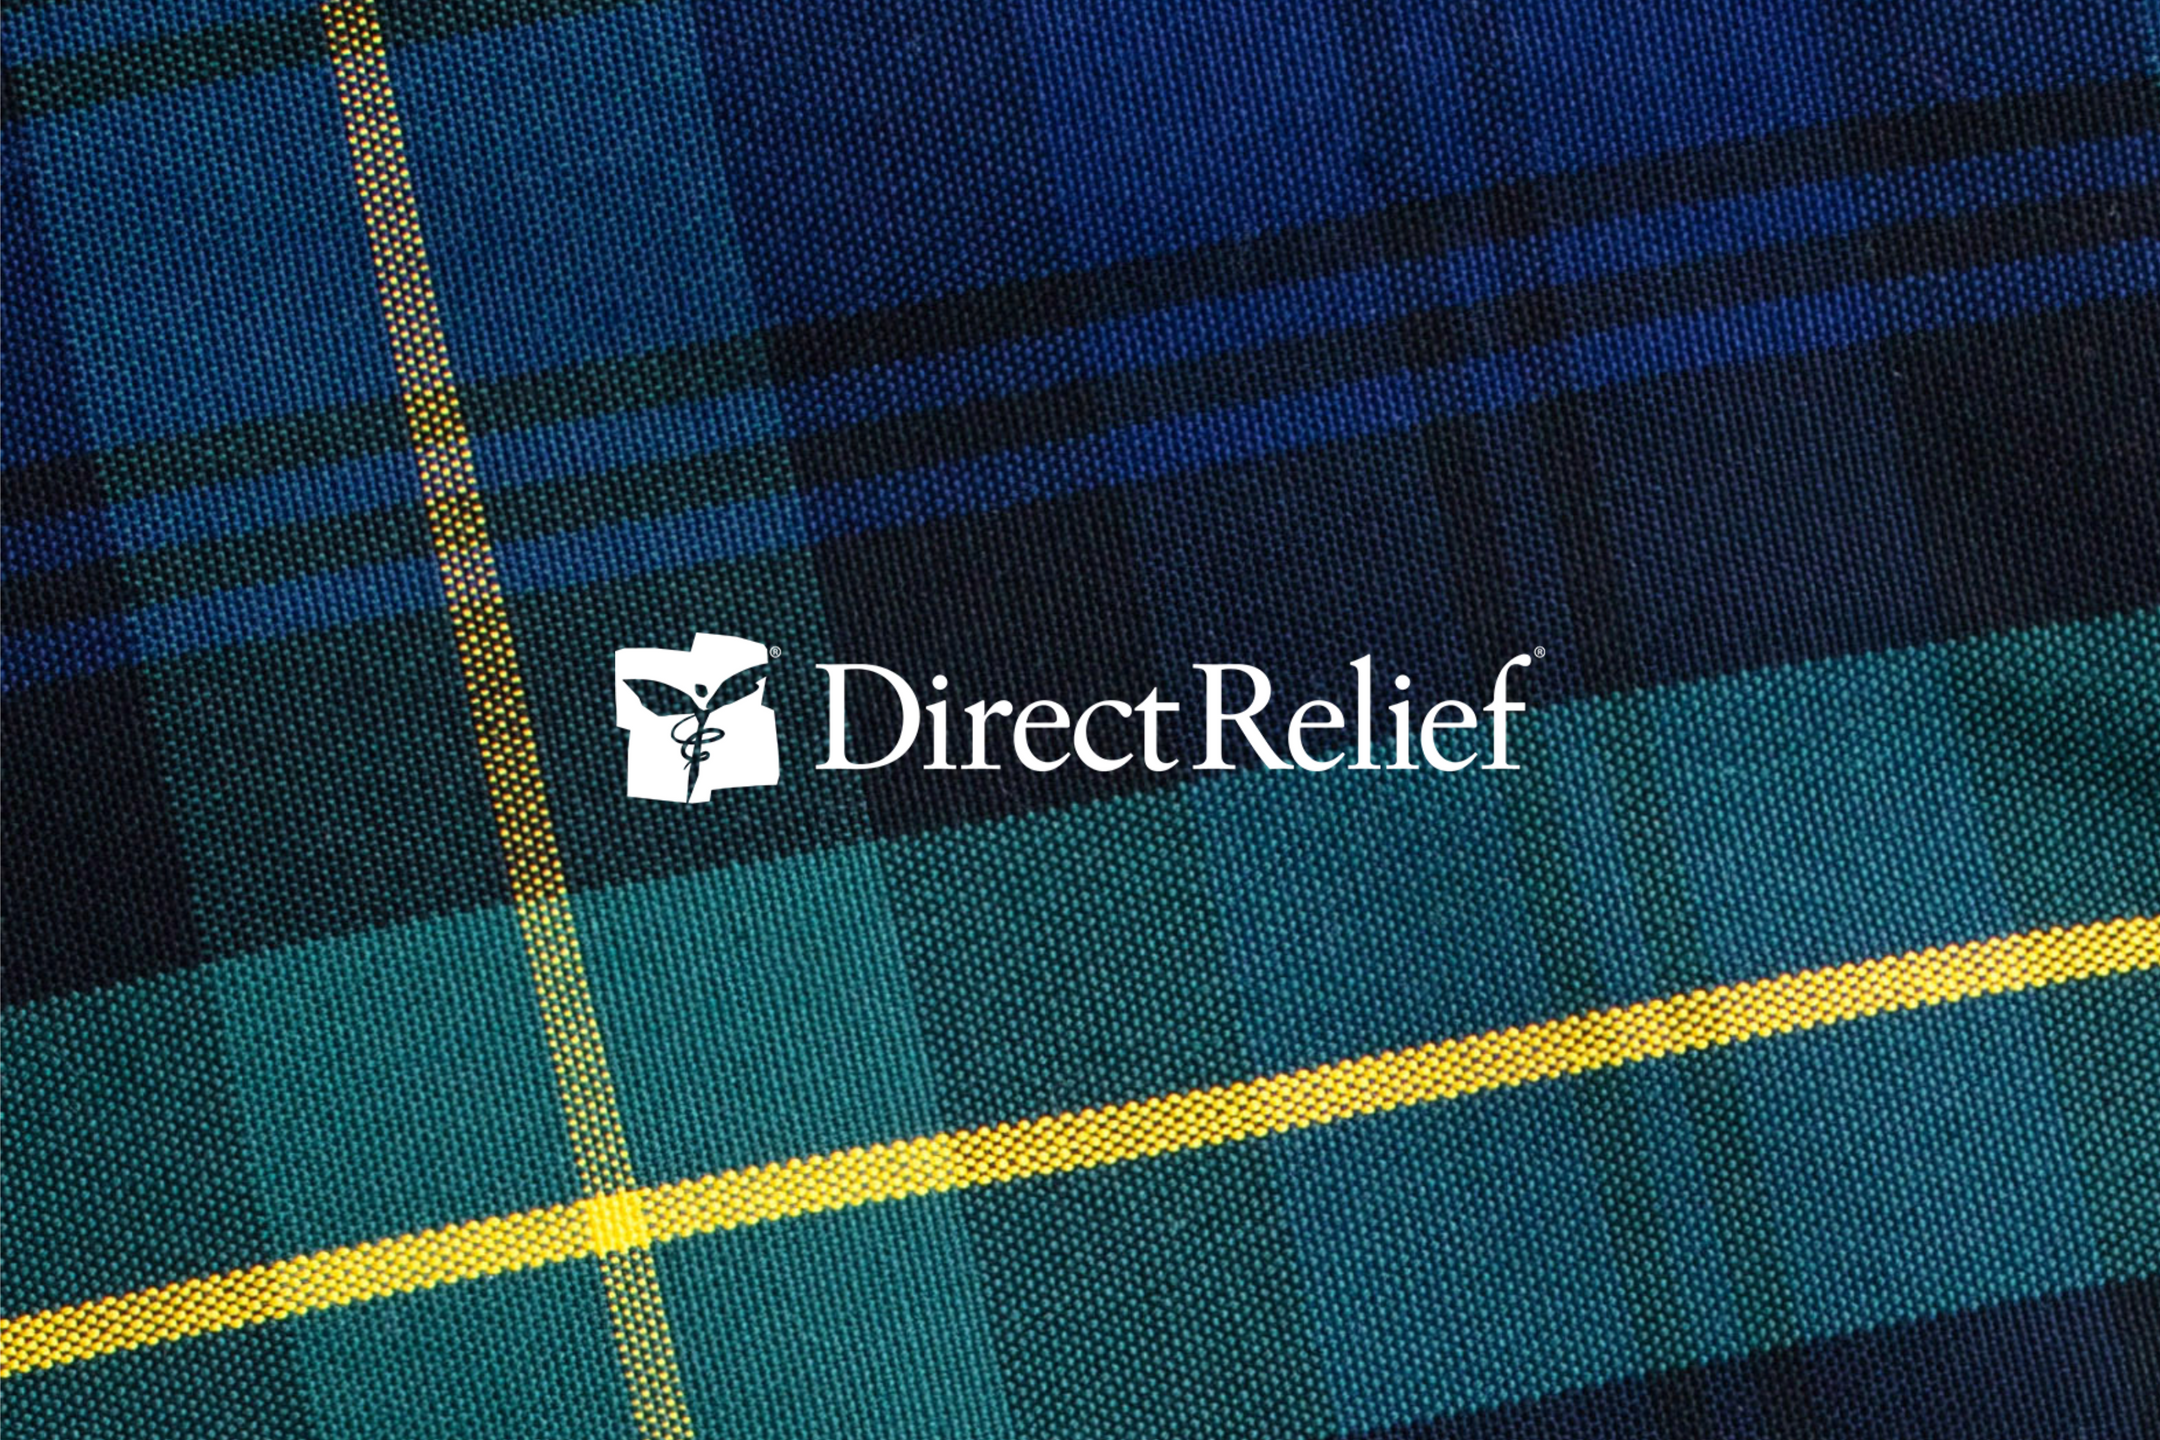 Learn More About Direct Relief  (We are donating 10% of all online sales to Direct Relief in the fight against Coronavirus until the end of May.)